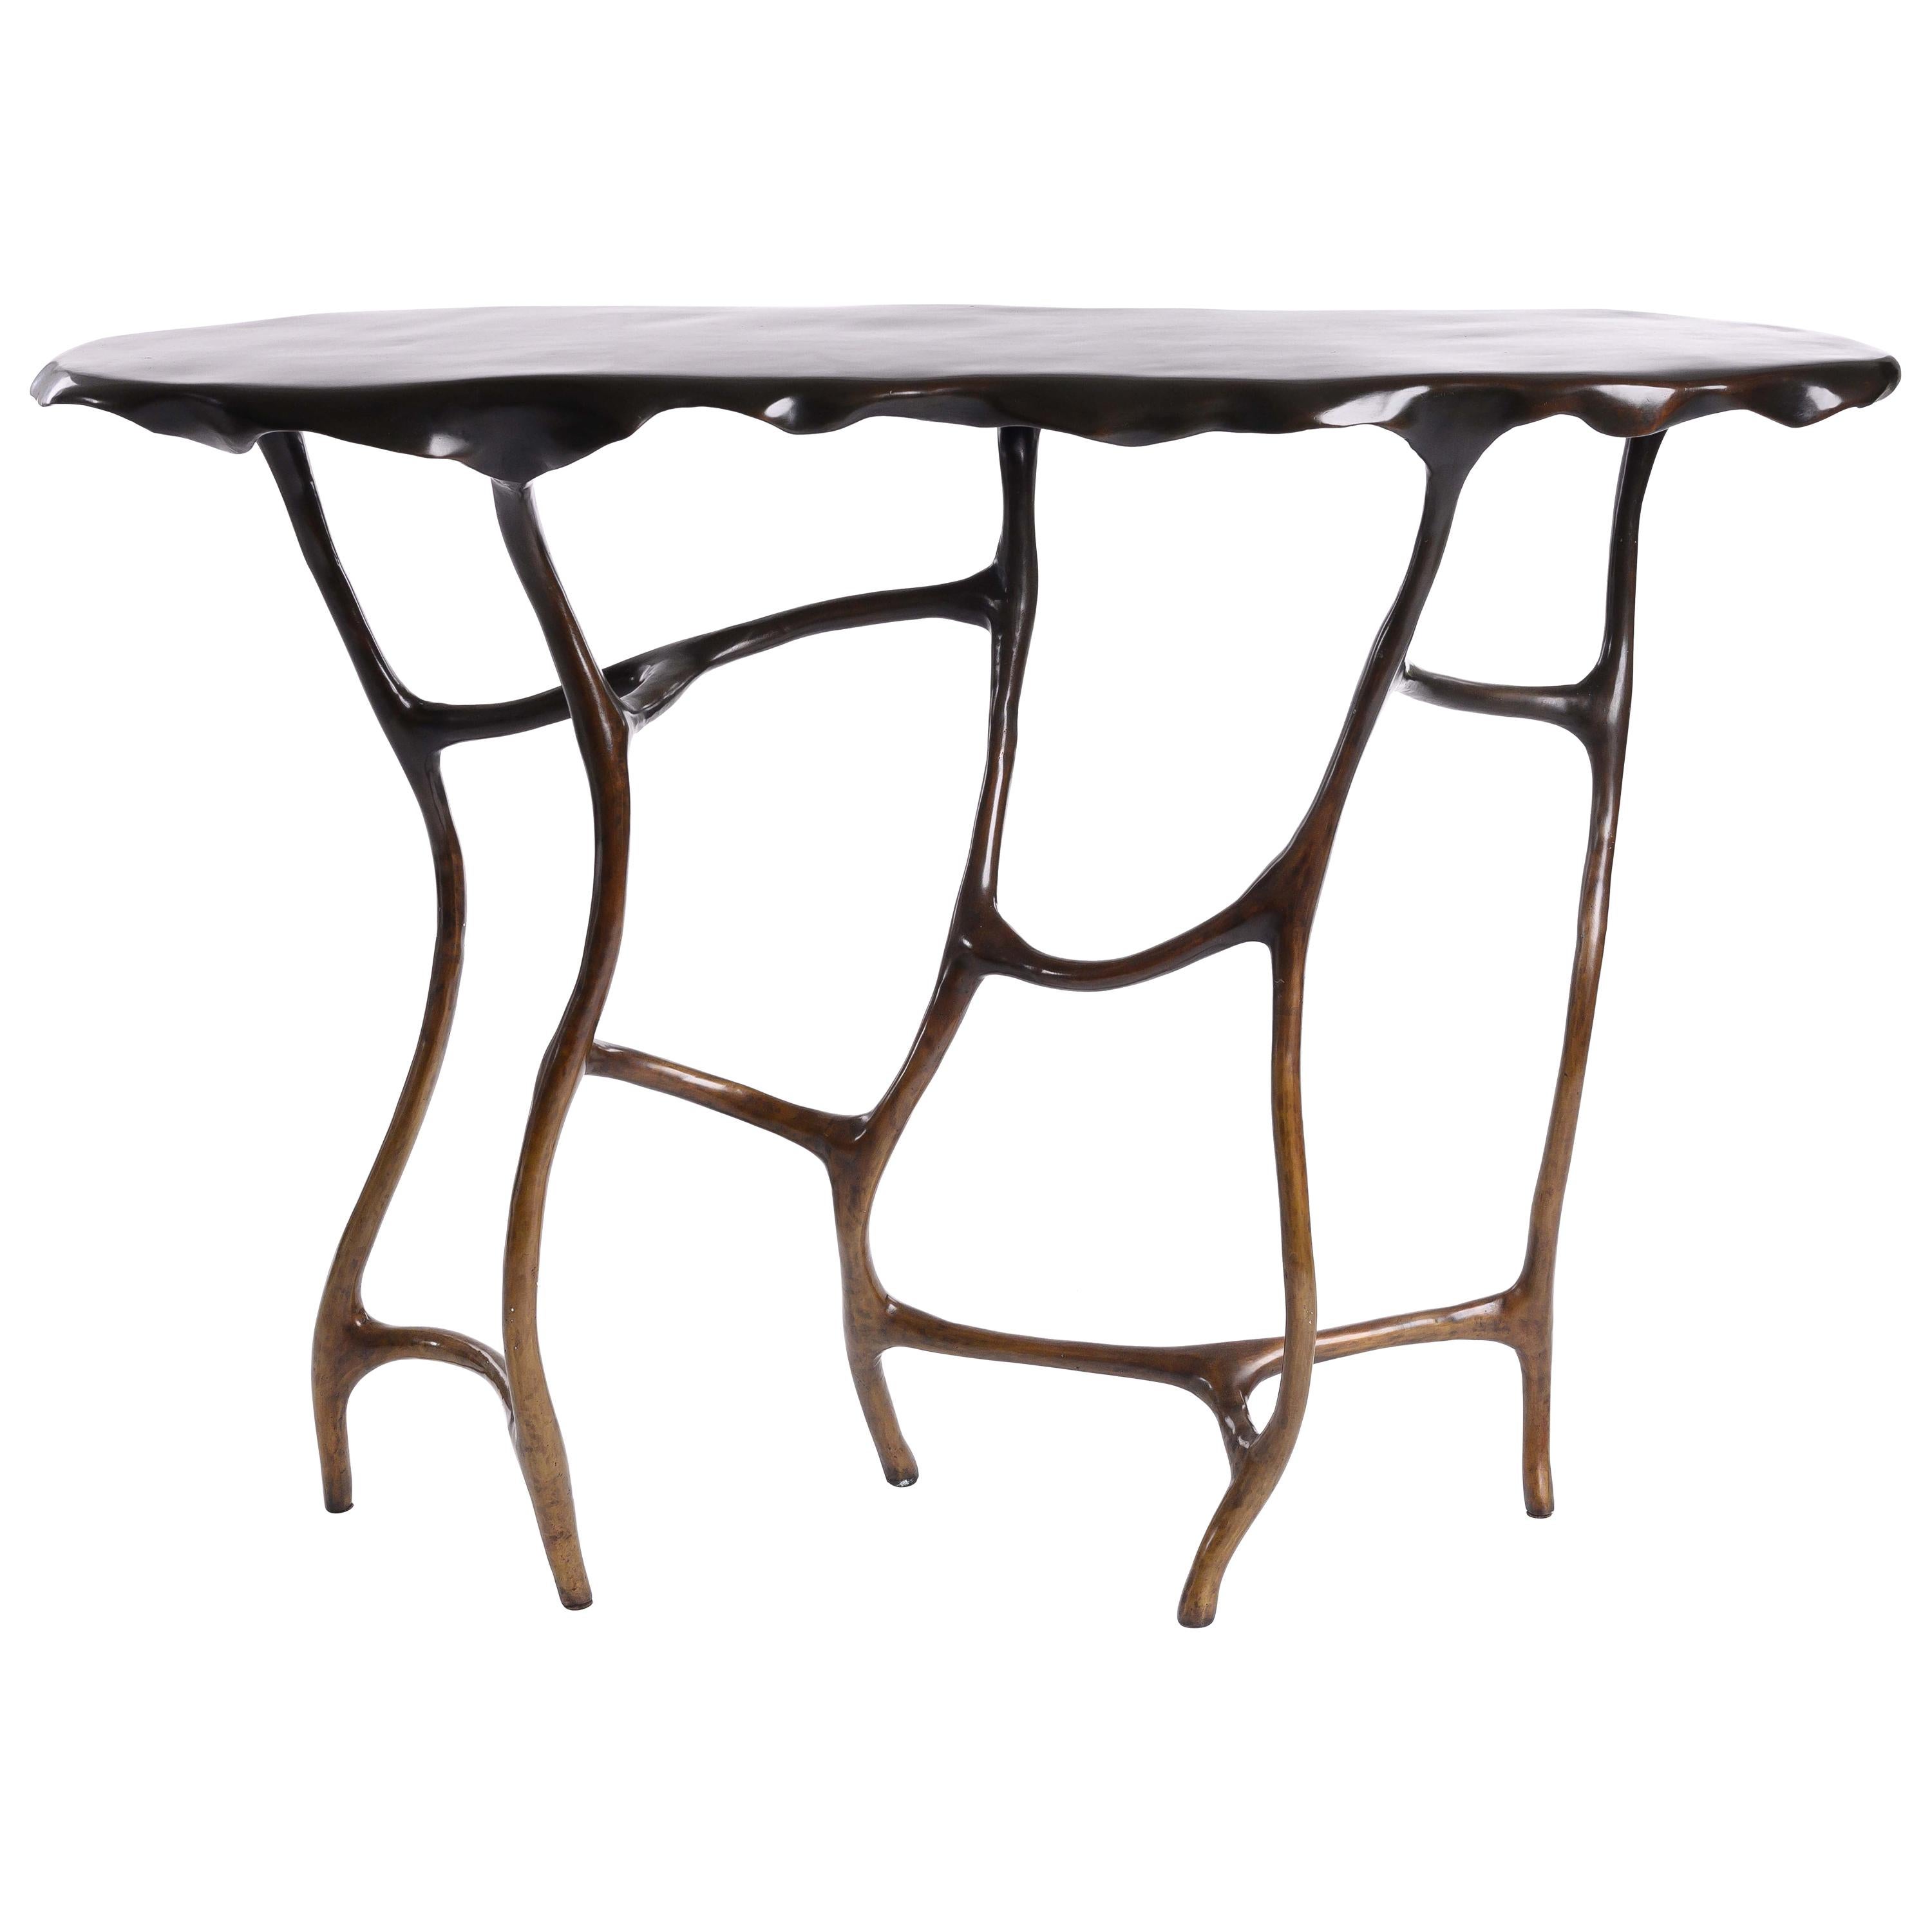 Bronze Dali Console Table in Ombre Finish by Elan Atelier (Preorder)